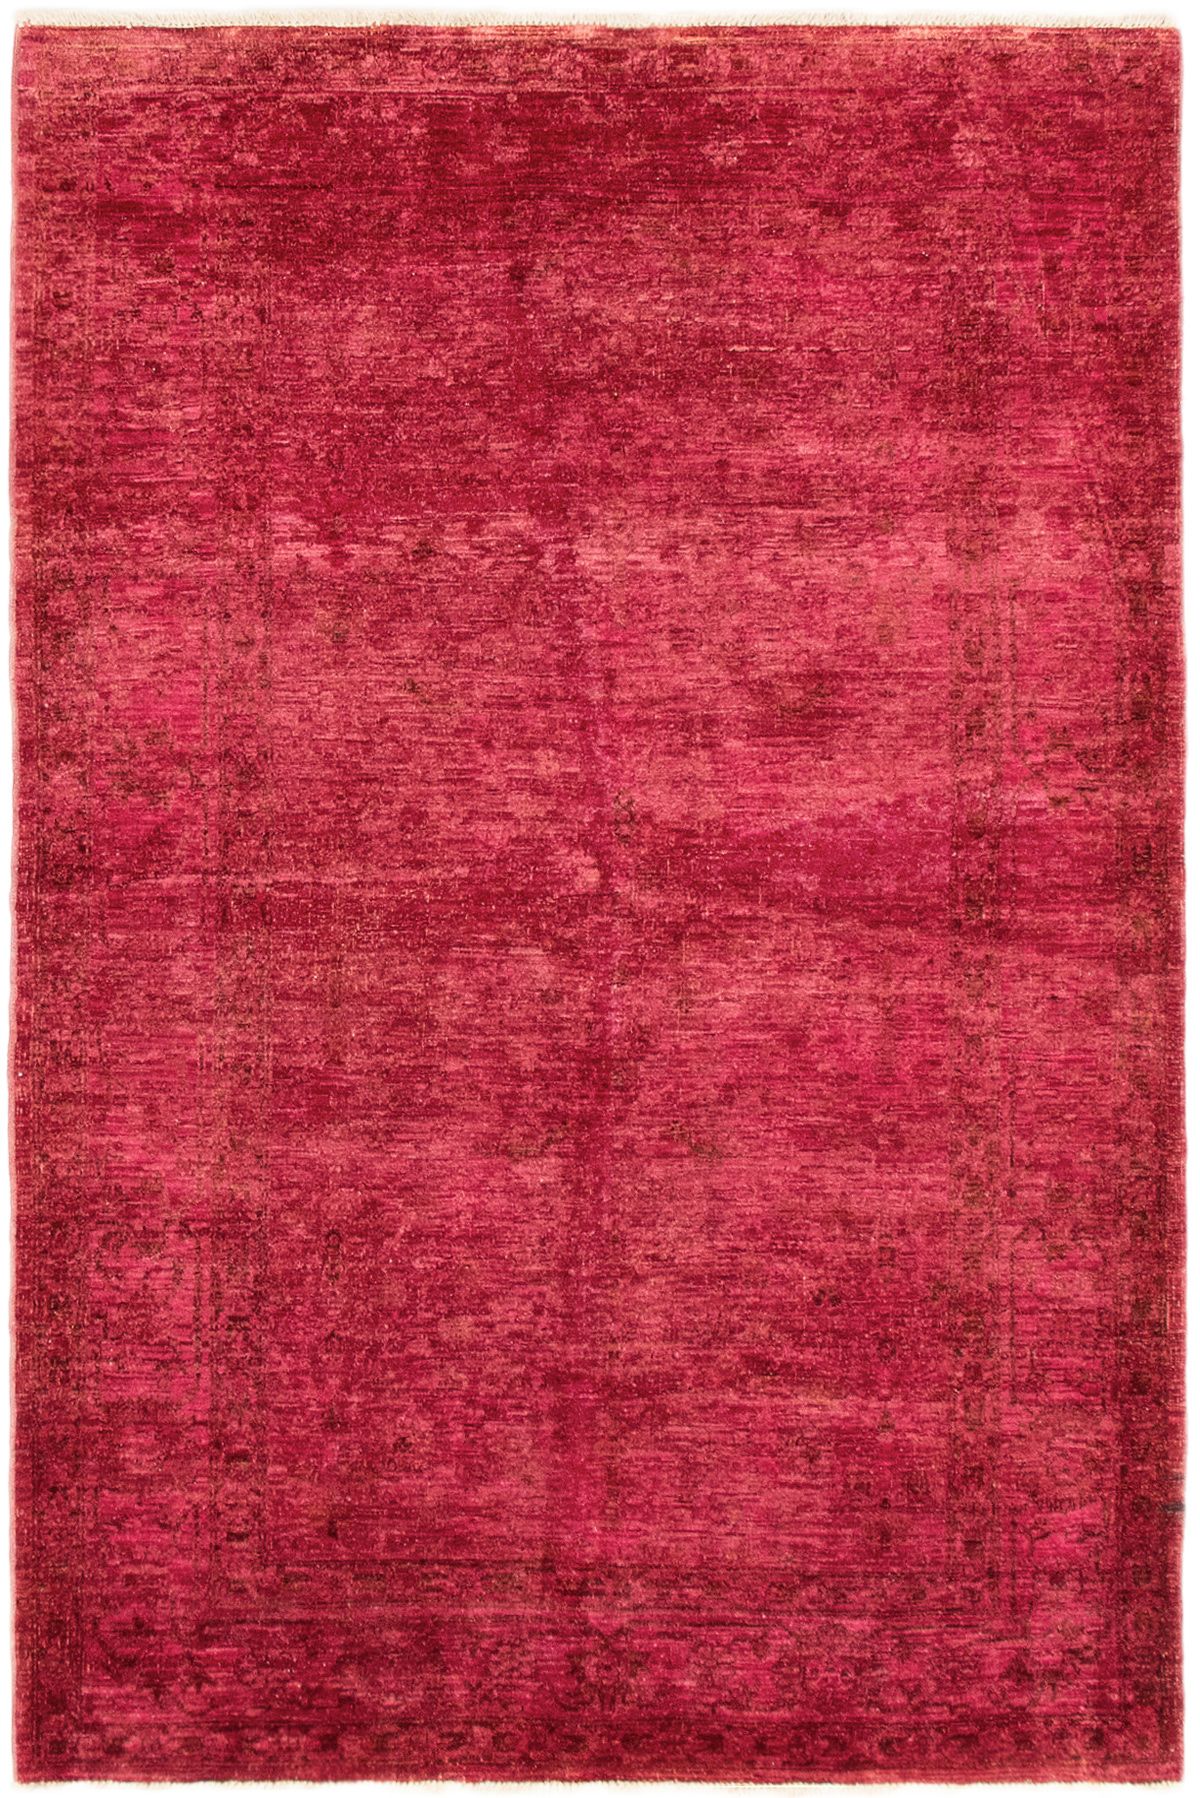 Hand-knotted Color transition Dark Pink Wool Rug 5'0" x 7'10" Size: 5'0" x 7'10"  